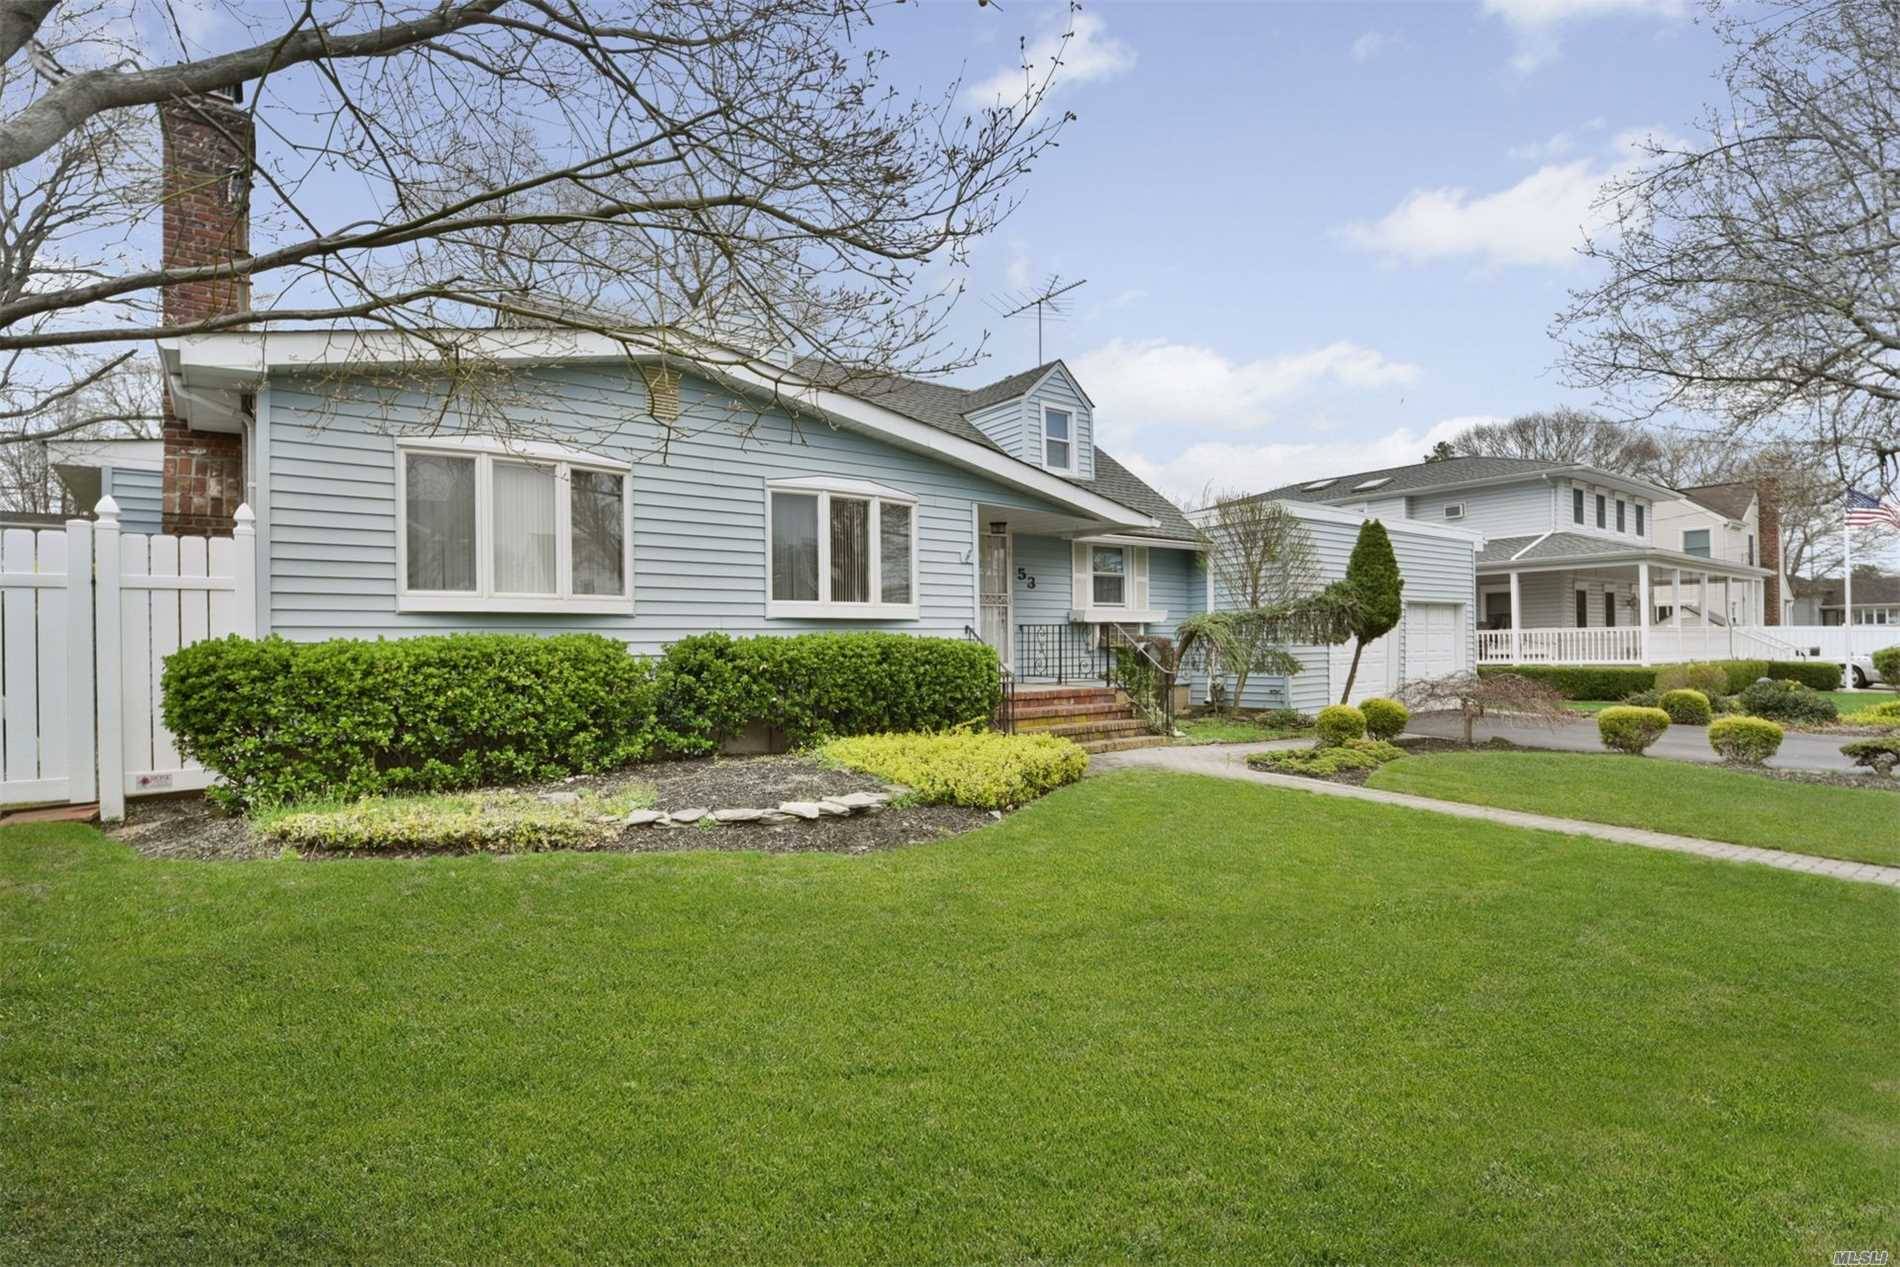 Lovely Expanded Cape Set On Oversized Property Located In Desirable Massapequa Park.